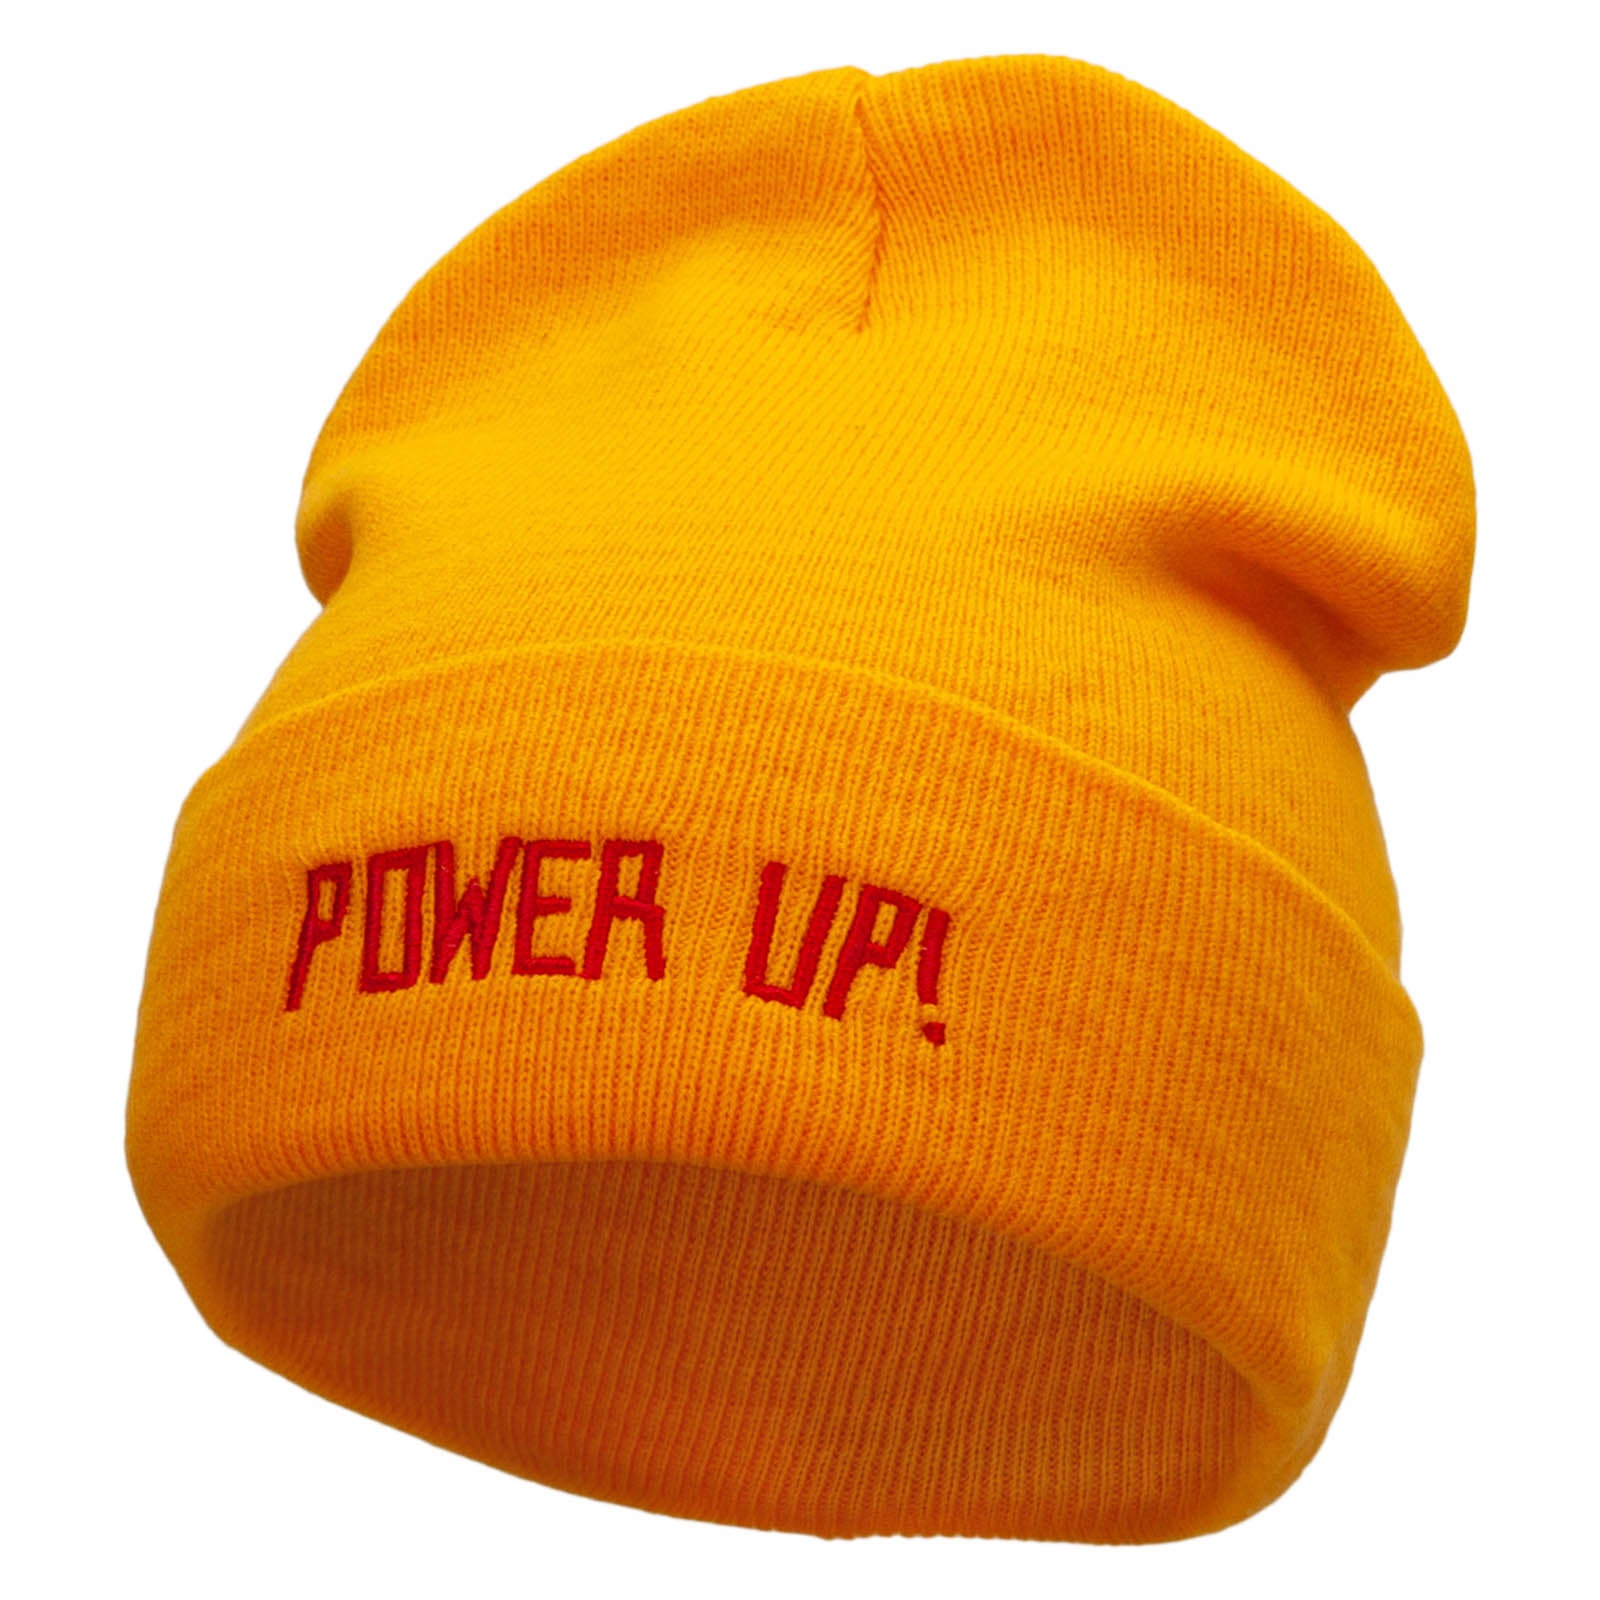 Power Up Embroidered 12 inch Acrylic Cuffed Long Beanie - Gold OSFM